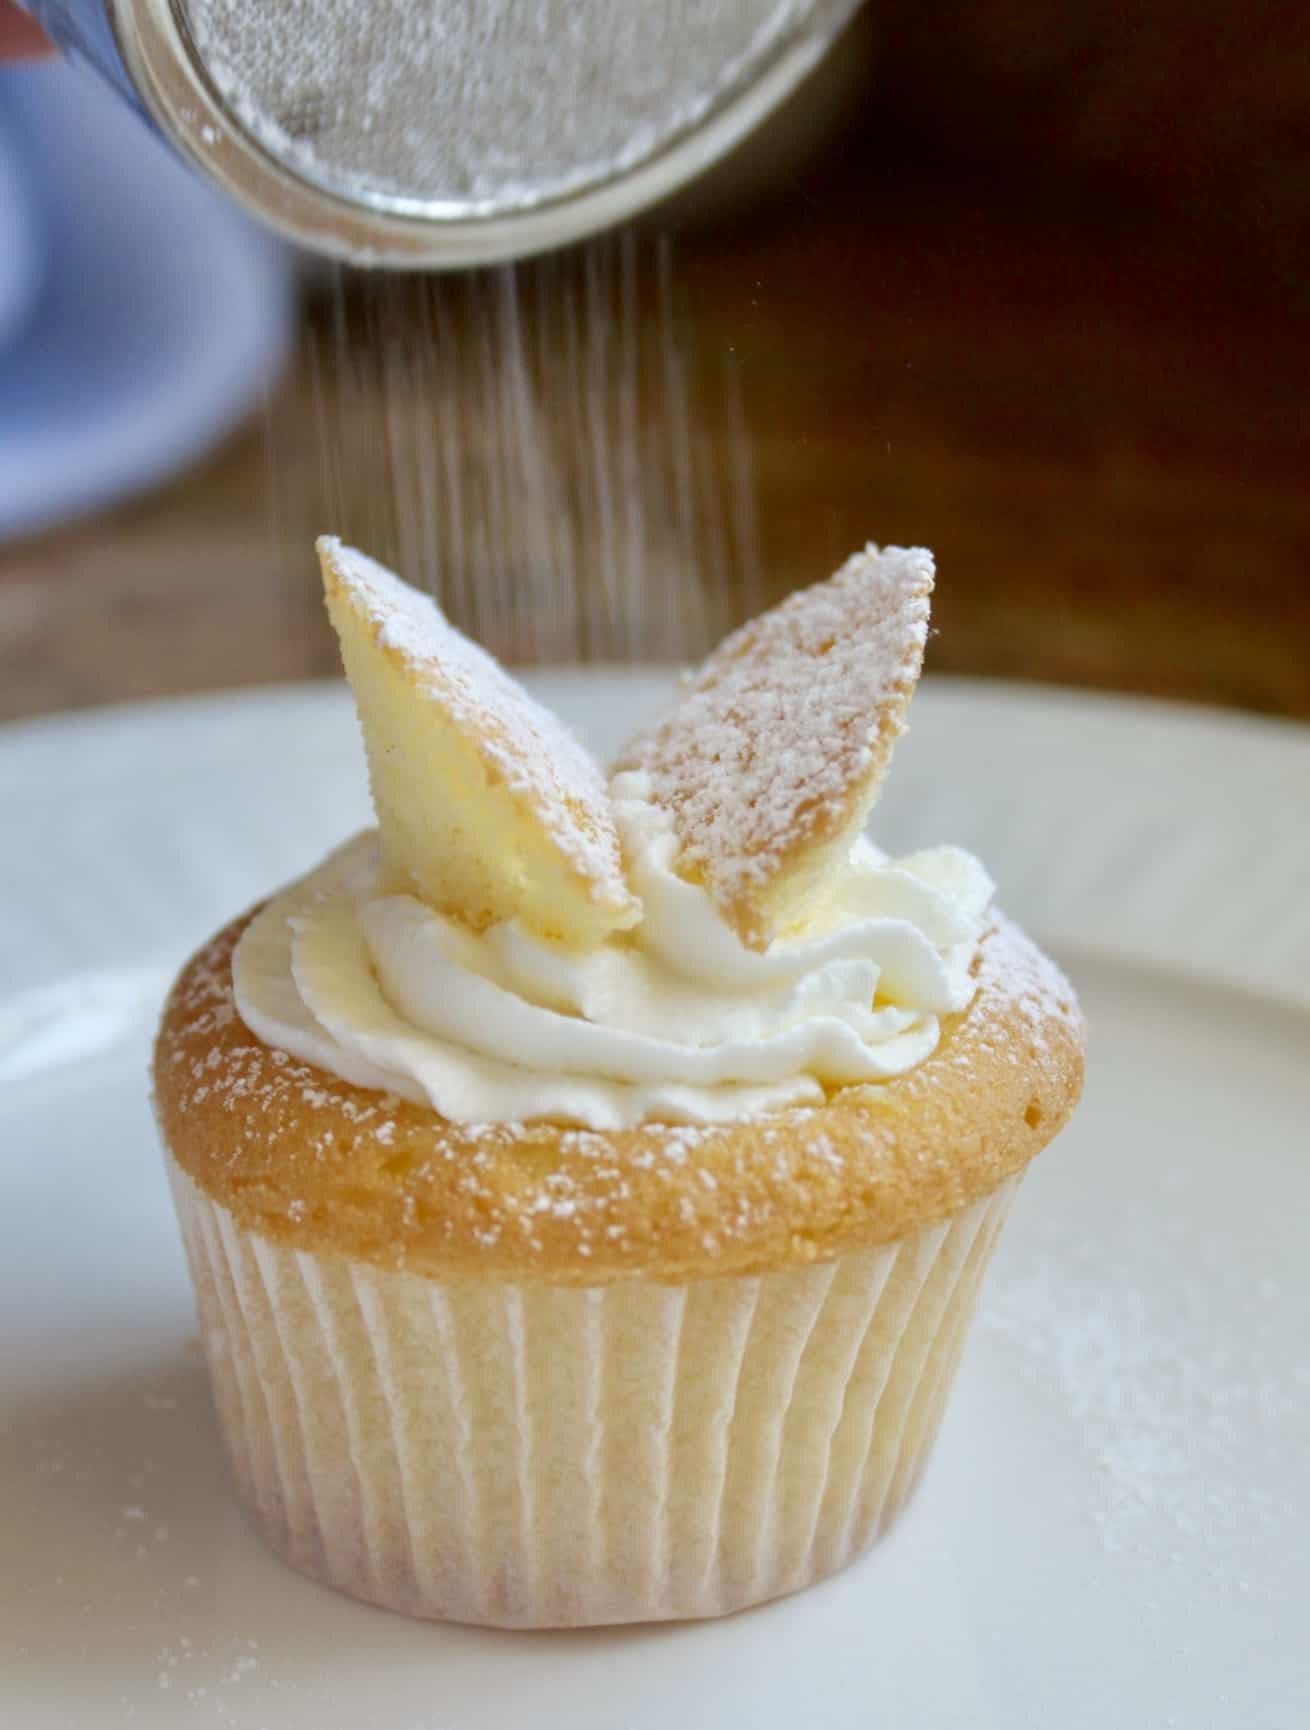 Butterfly cupcake with confectioner's sugar sifting onto it